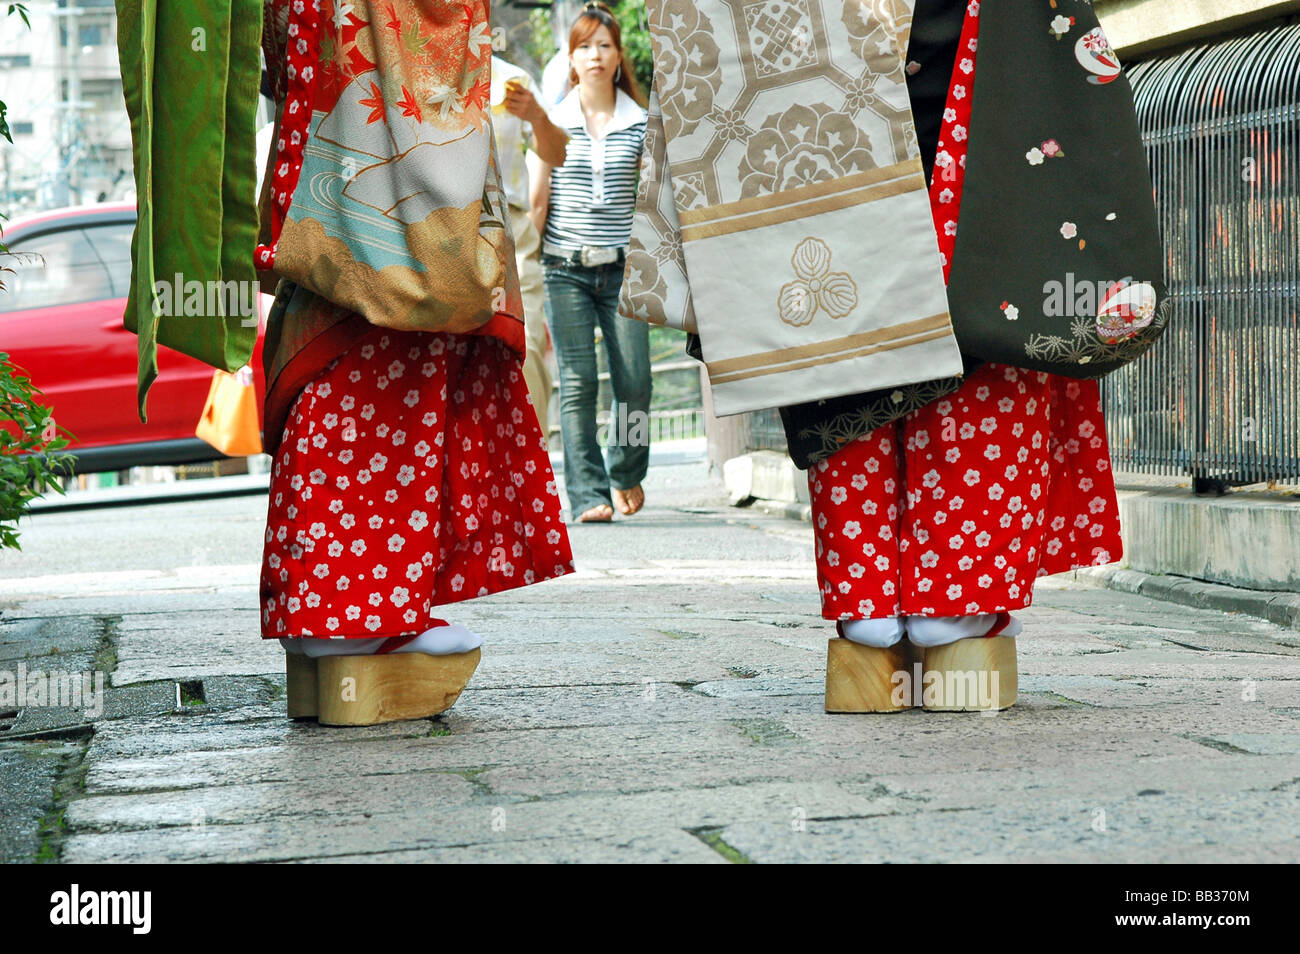 JAPAN, Kyoto. Two geishas standing in the street, wearing their traditional clothing and thick wooden sole sandals Stock Photo